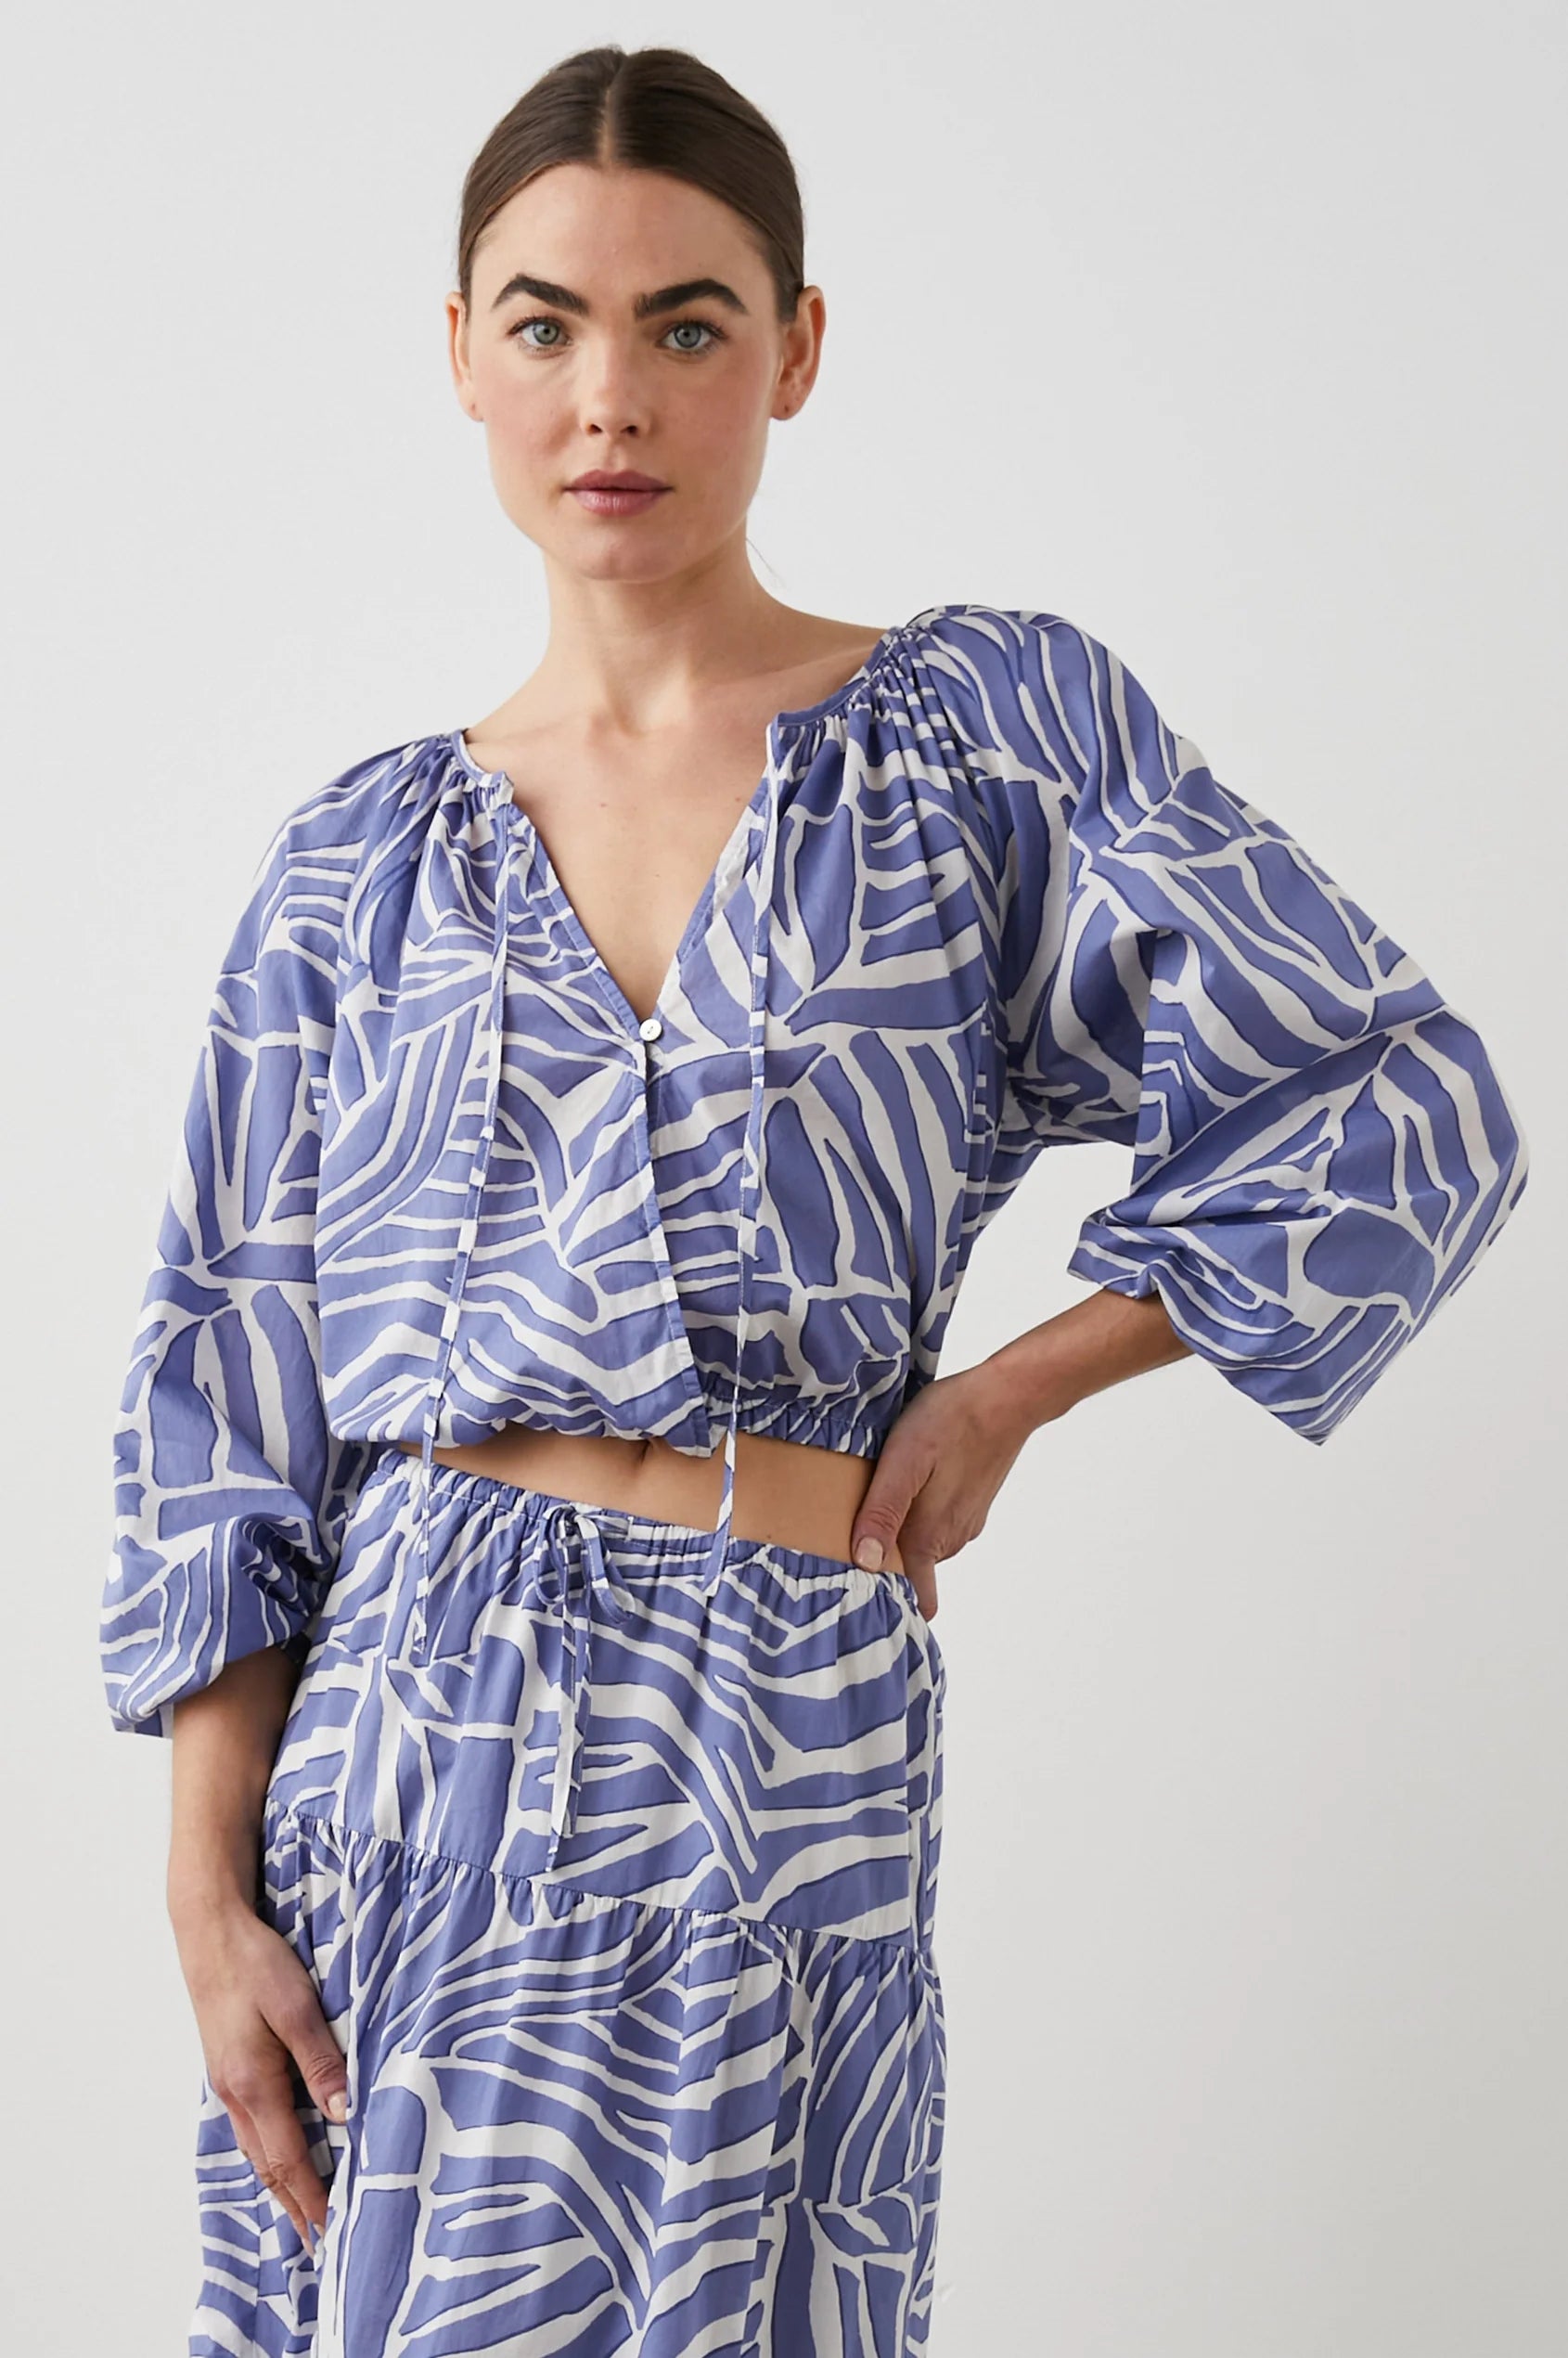 Cropped cross over top with notch neck and long full sleeves with elasticated sleeves in white and blue geometric pattern